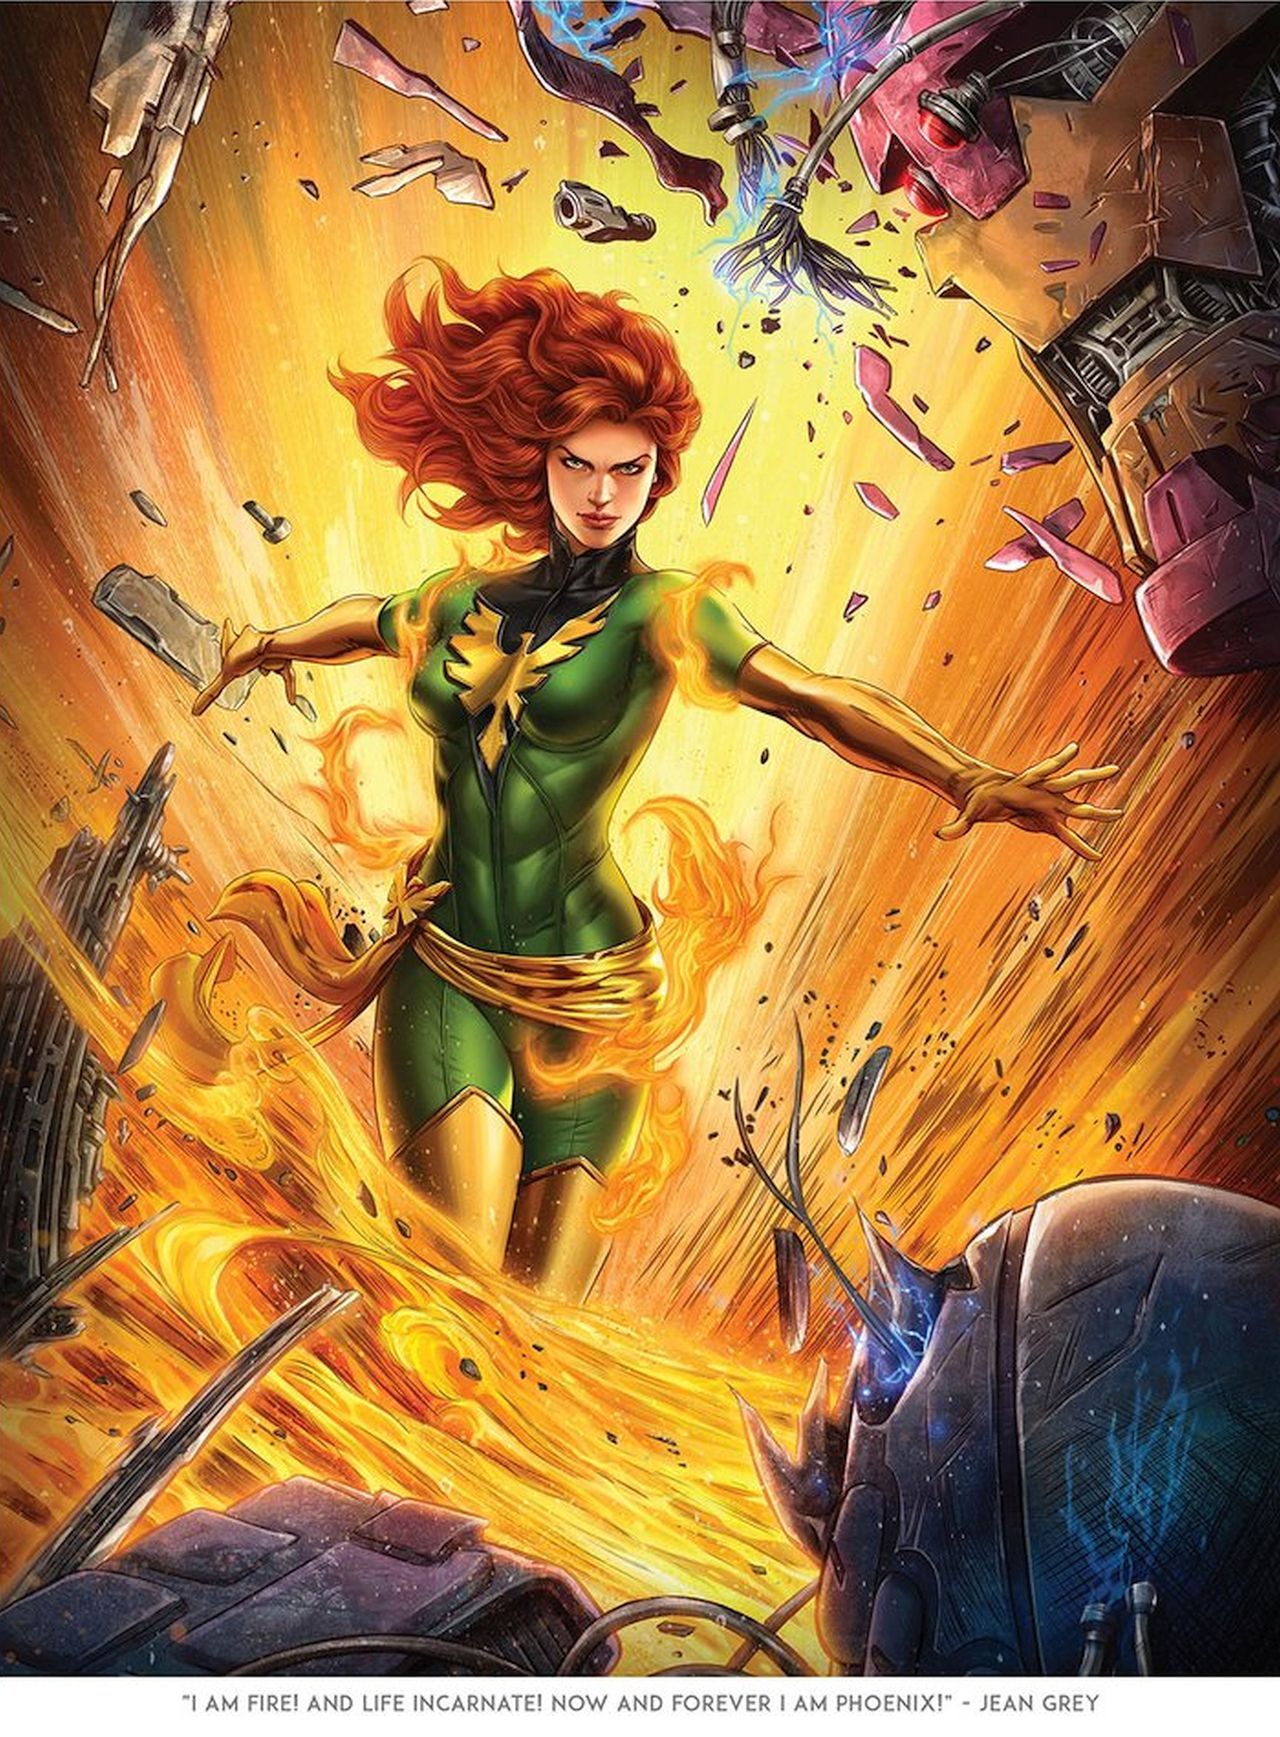 Art Collection of Jean Grey from various Artist 15